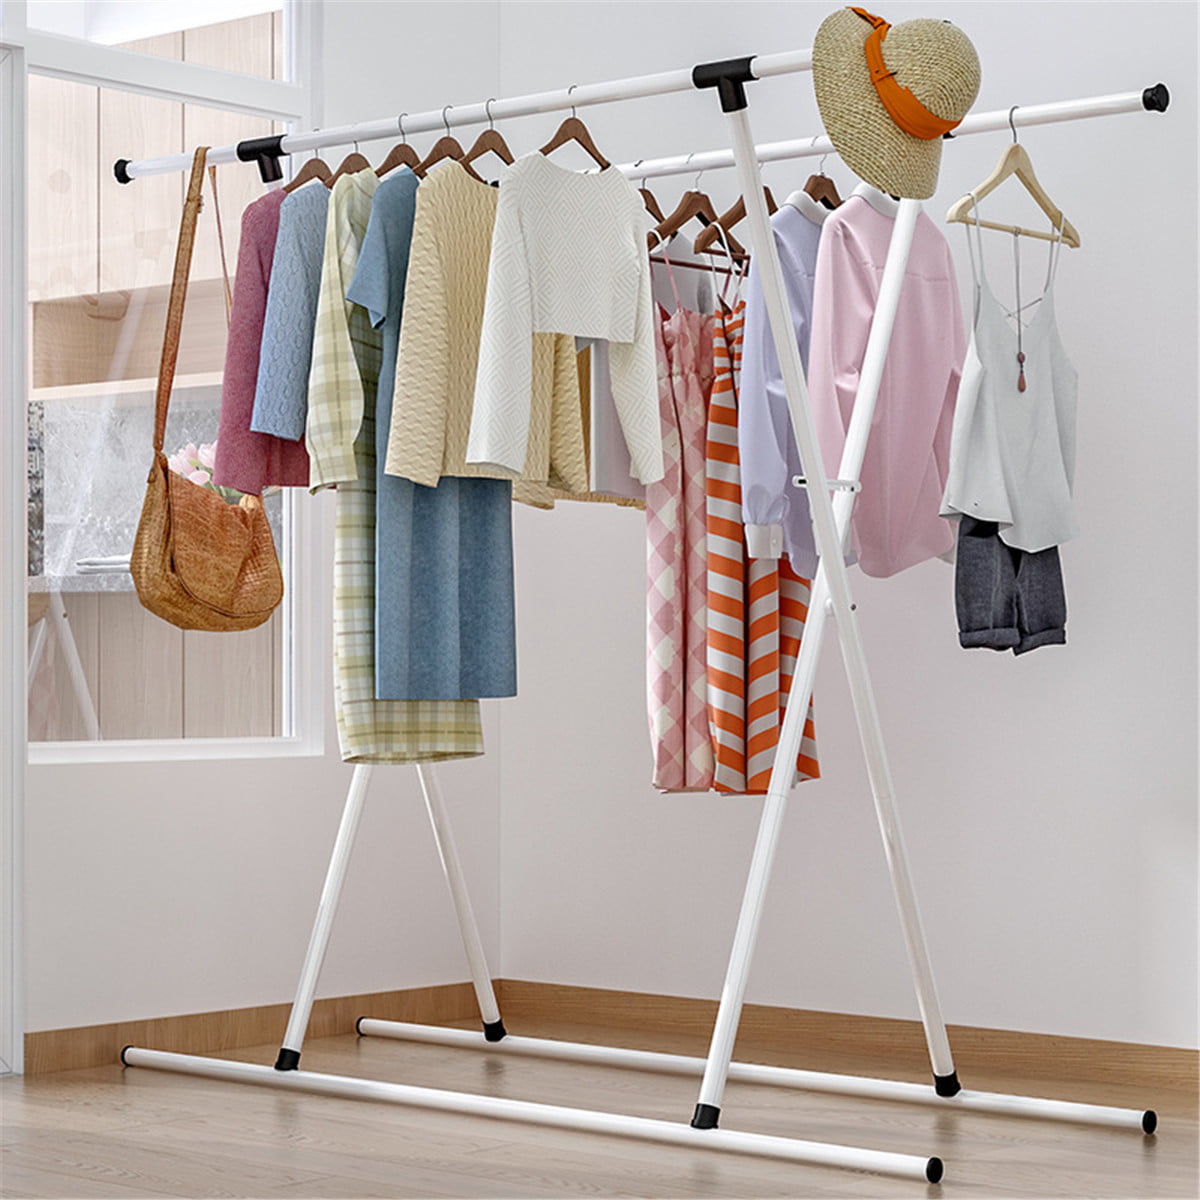 Bearing 110lbs Heavy Duty Adjustable Commercial Garment Clothes Rack